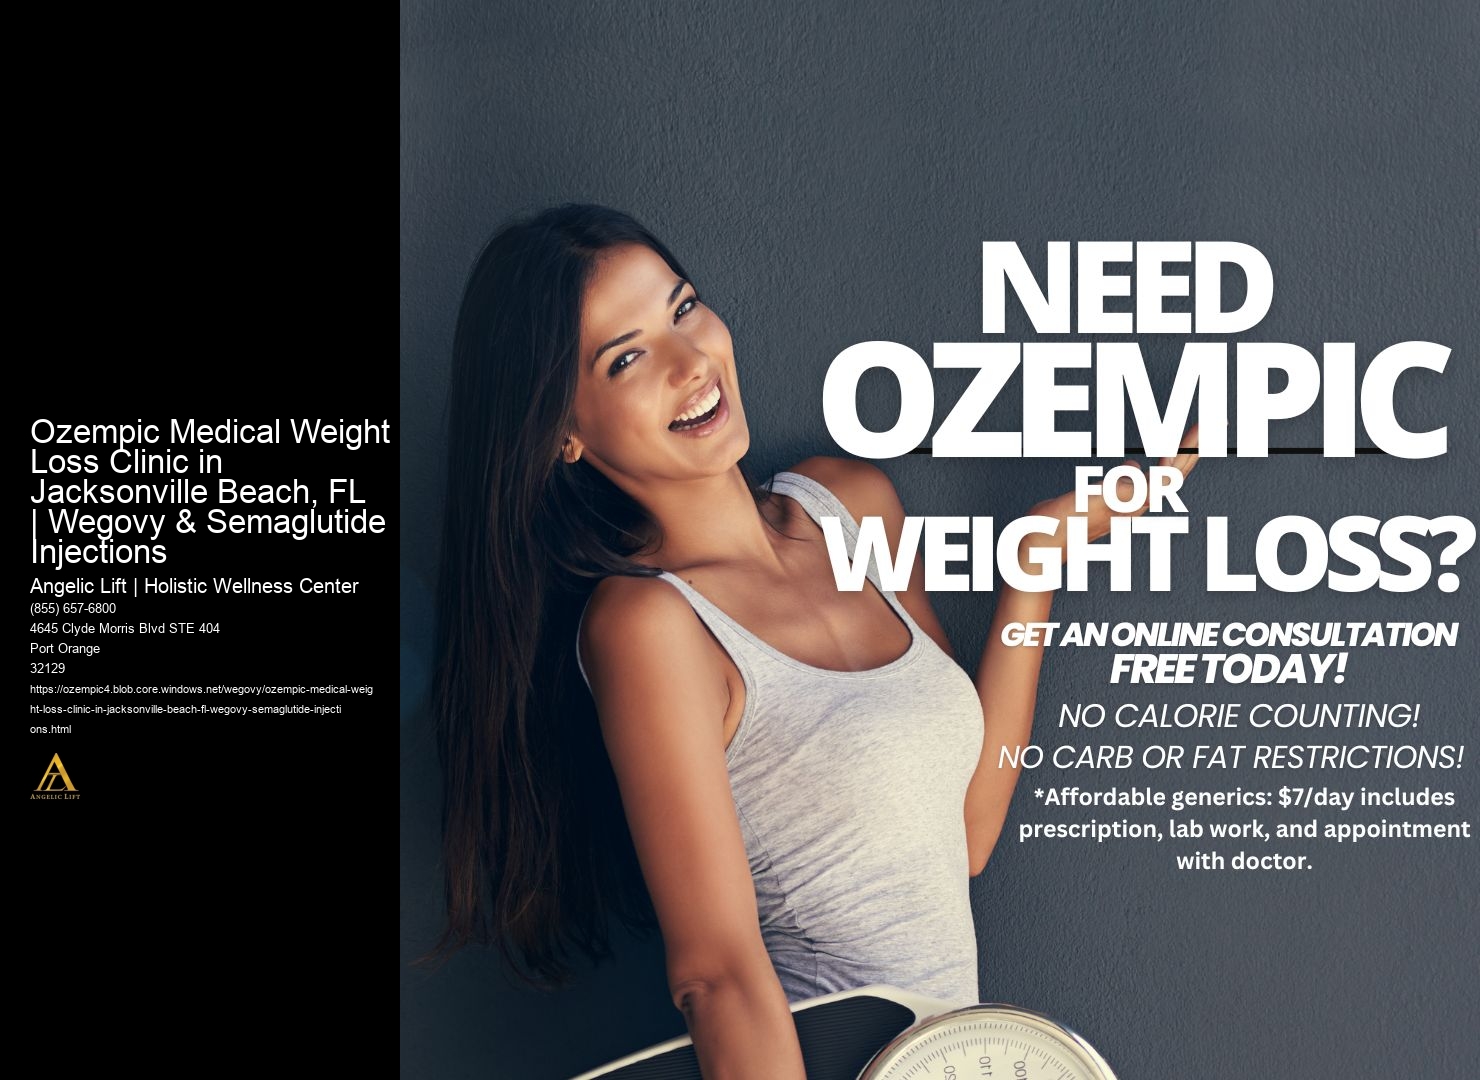 Ozempic Medical Weight Loss Clinic in Jacksonville Beach, FL | Wegovy & Semaglutide Injections